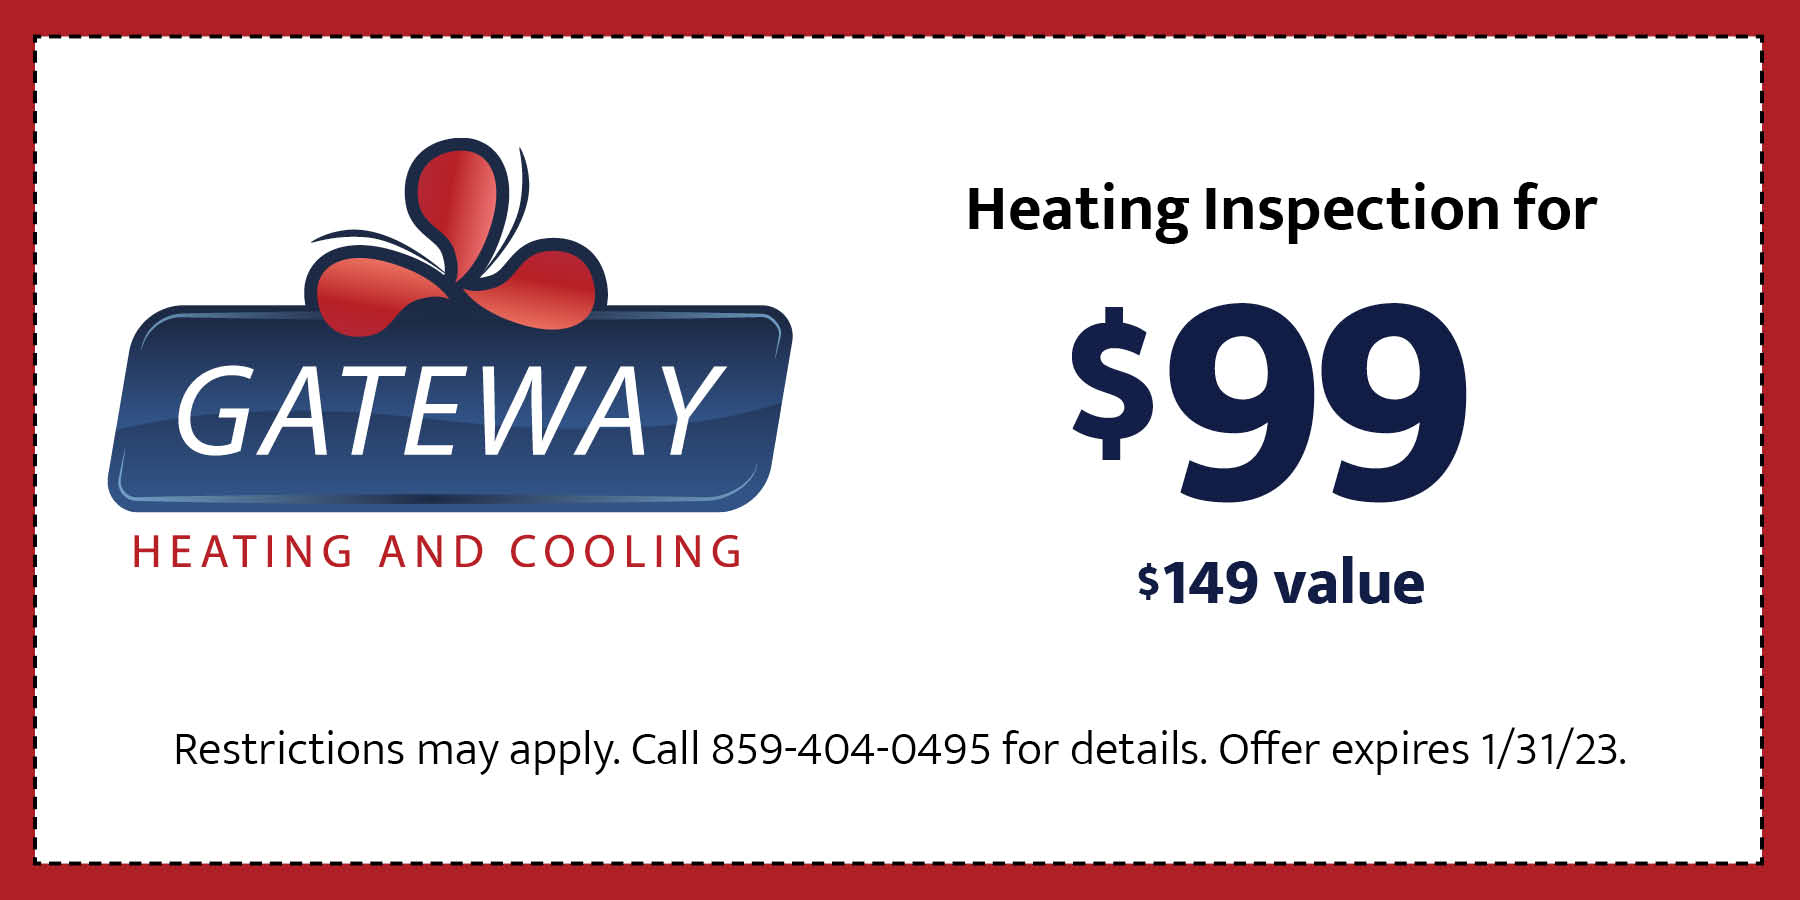  heating inspection. contact us for details! expires 1/31/2023.